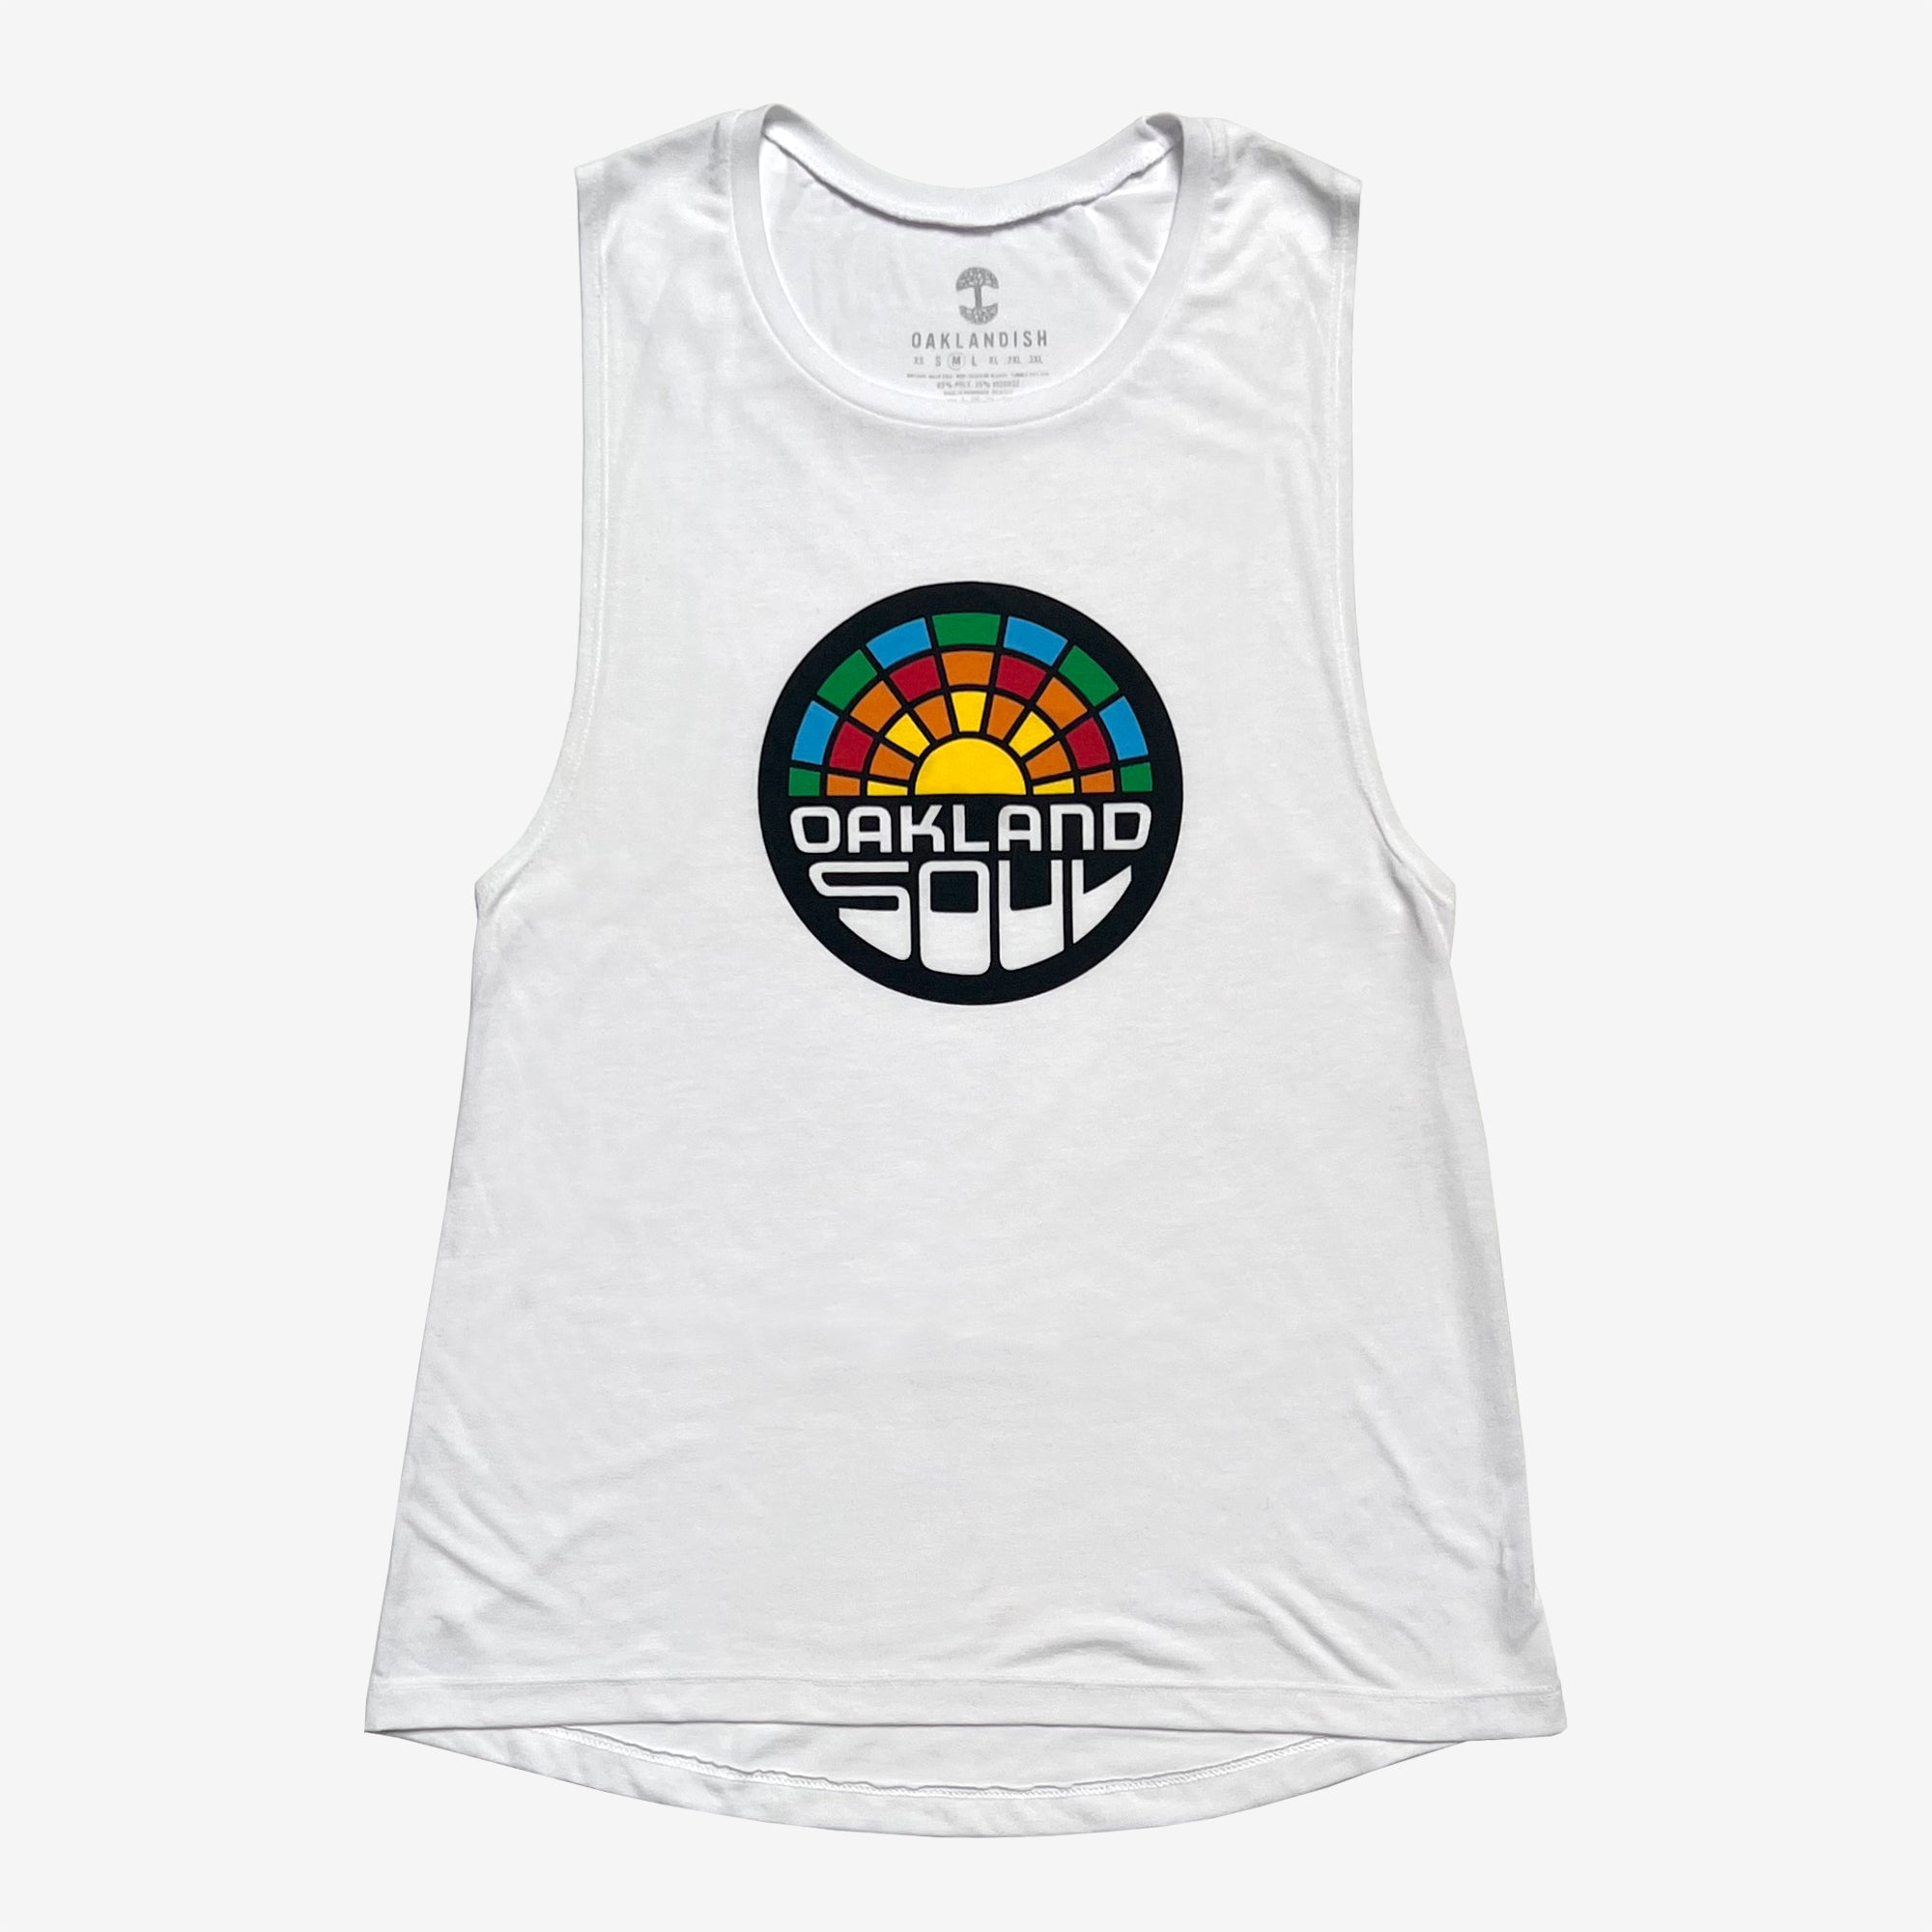 Front view of flowy women’s cut muscle tank with low-cut armholes featuring full-color Oakland Soul logo.